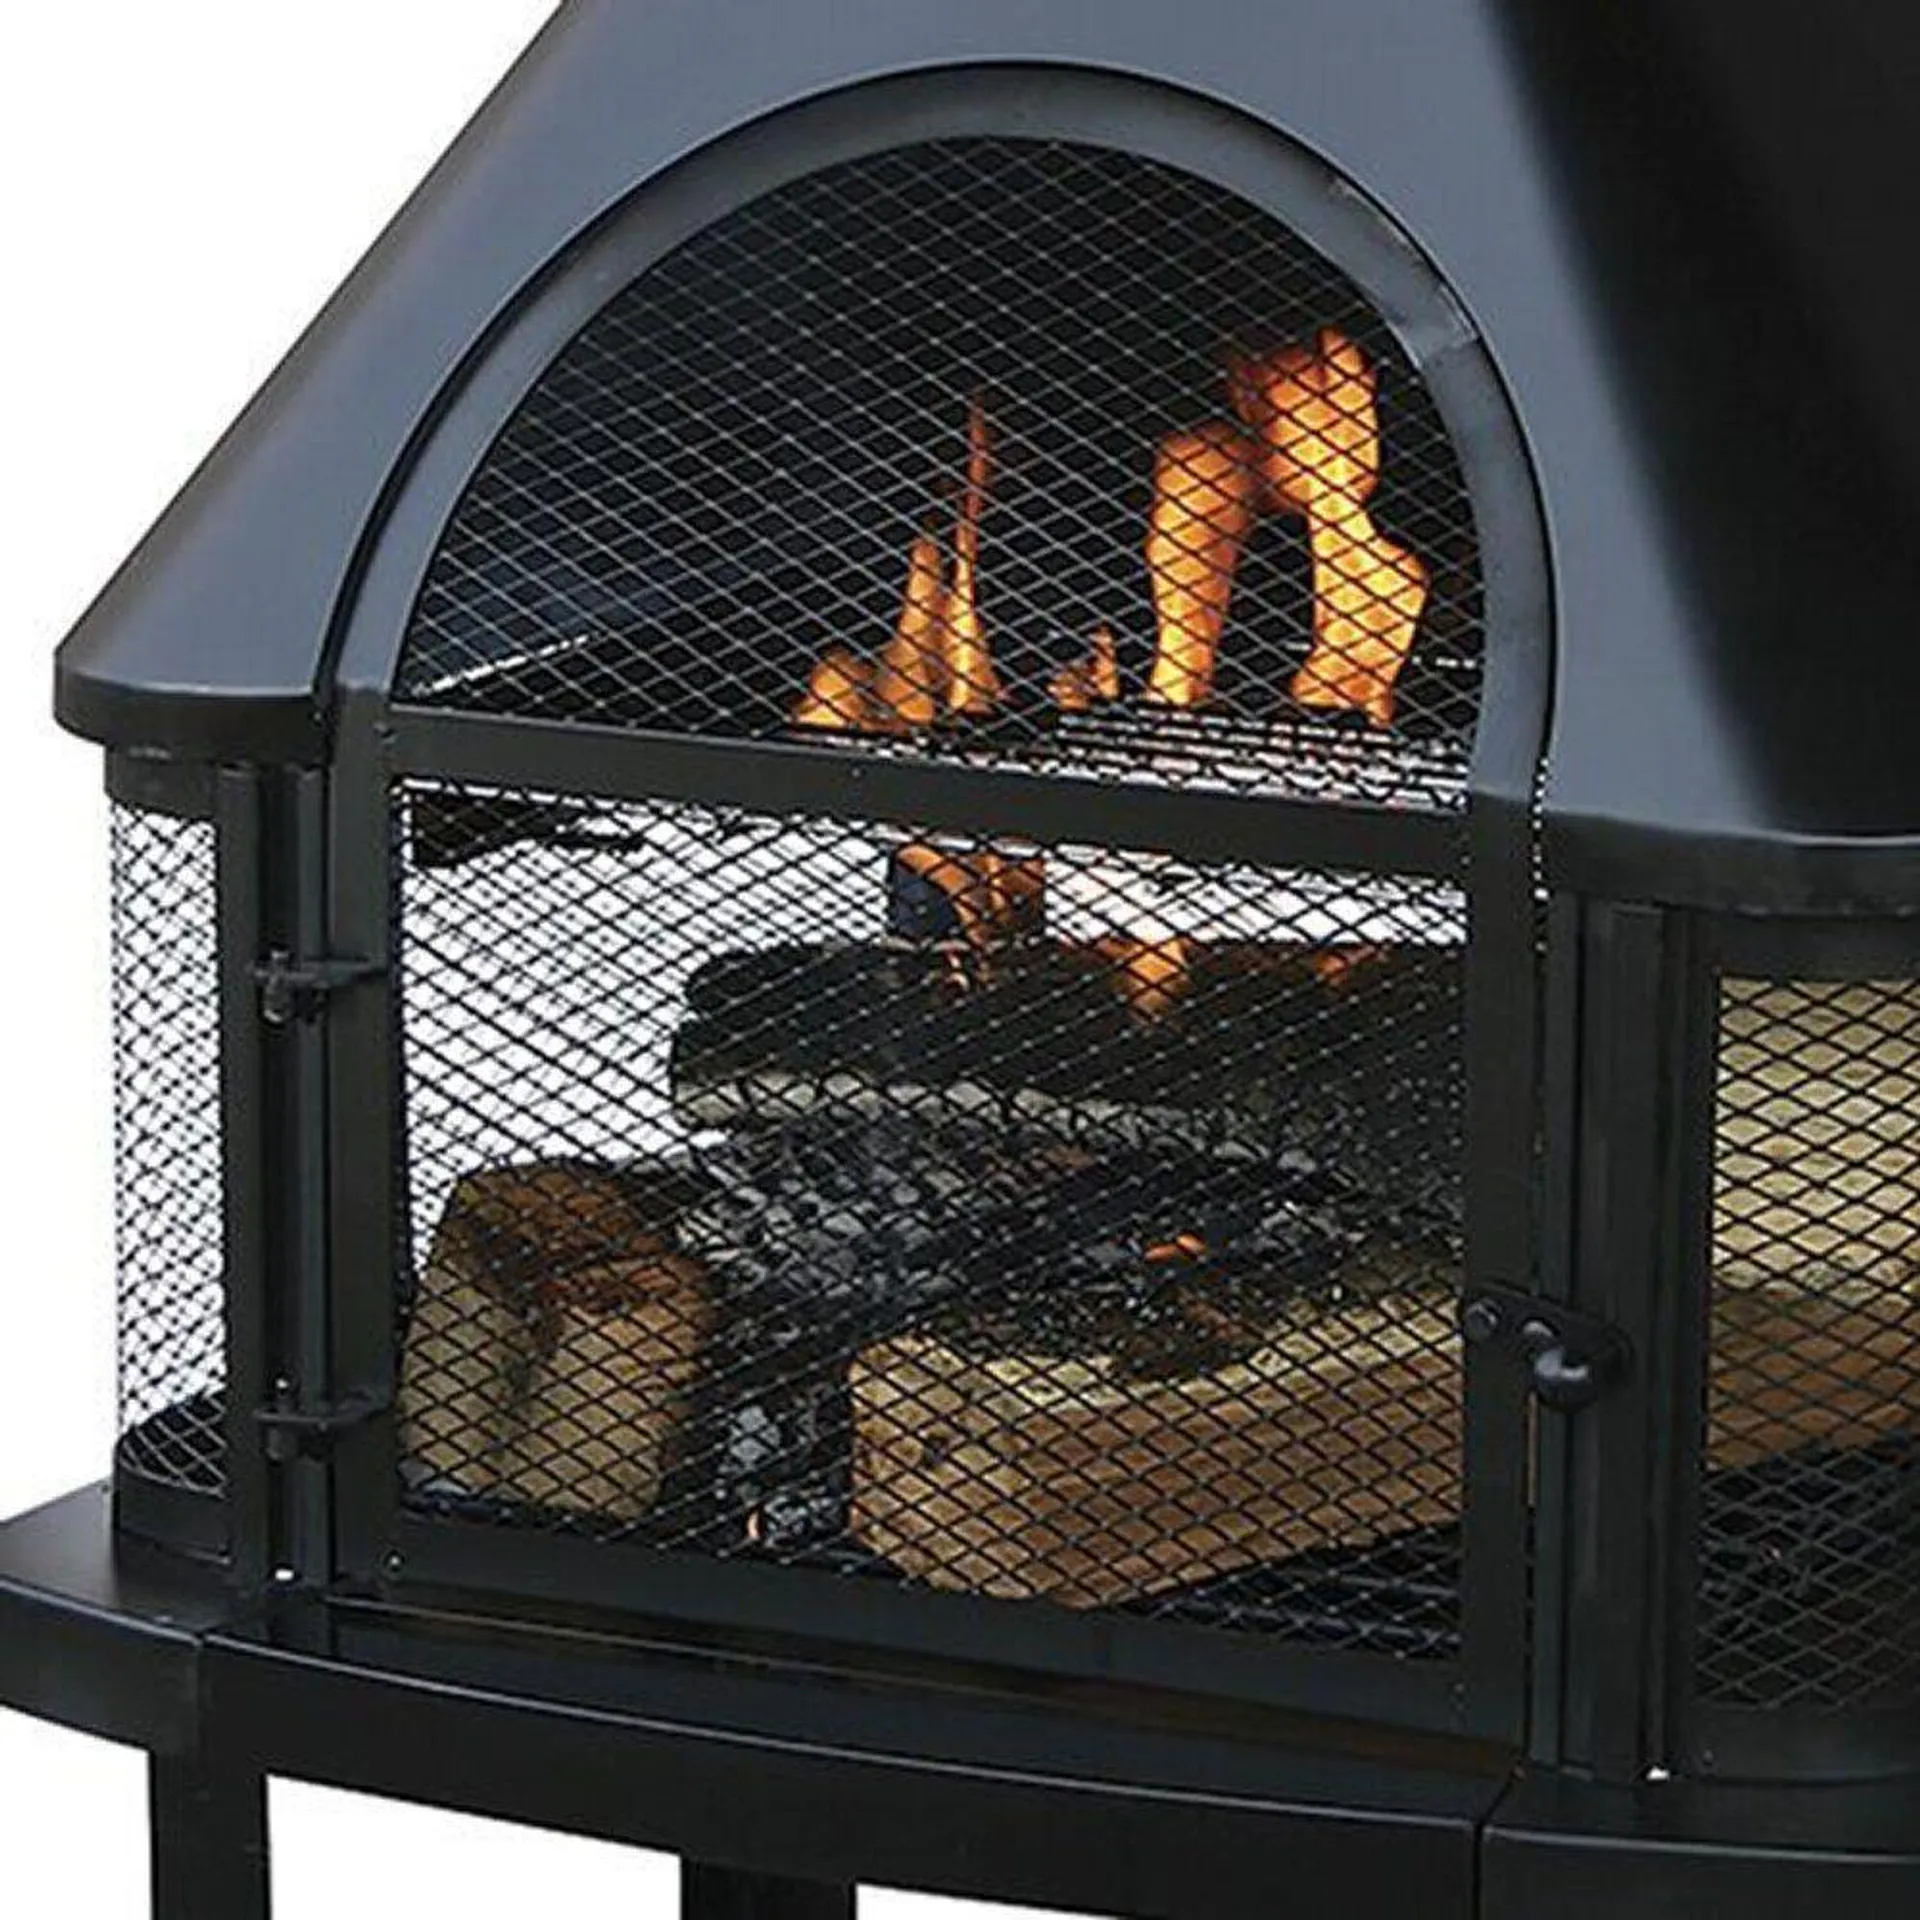 Endless Summer Wood Burning Outdoor Firehouse Fire Pit